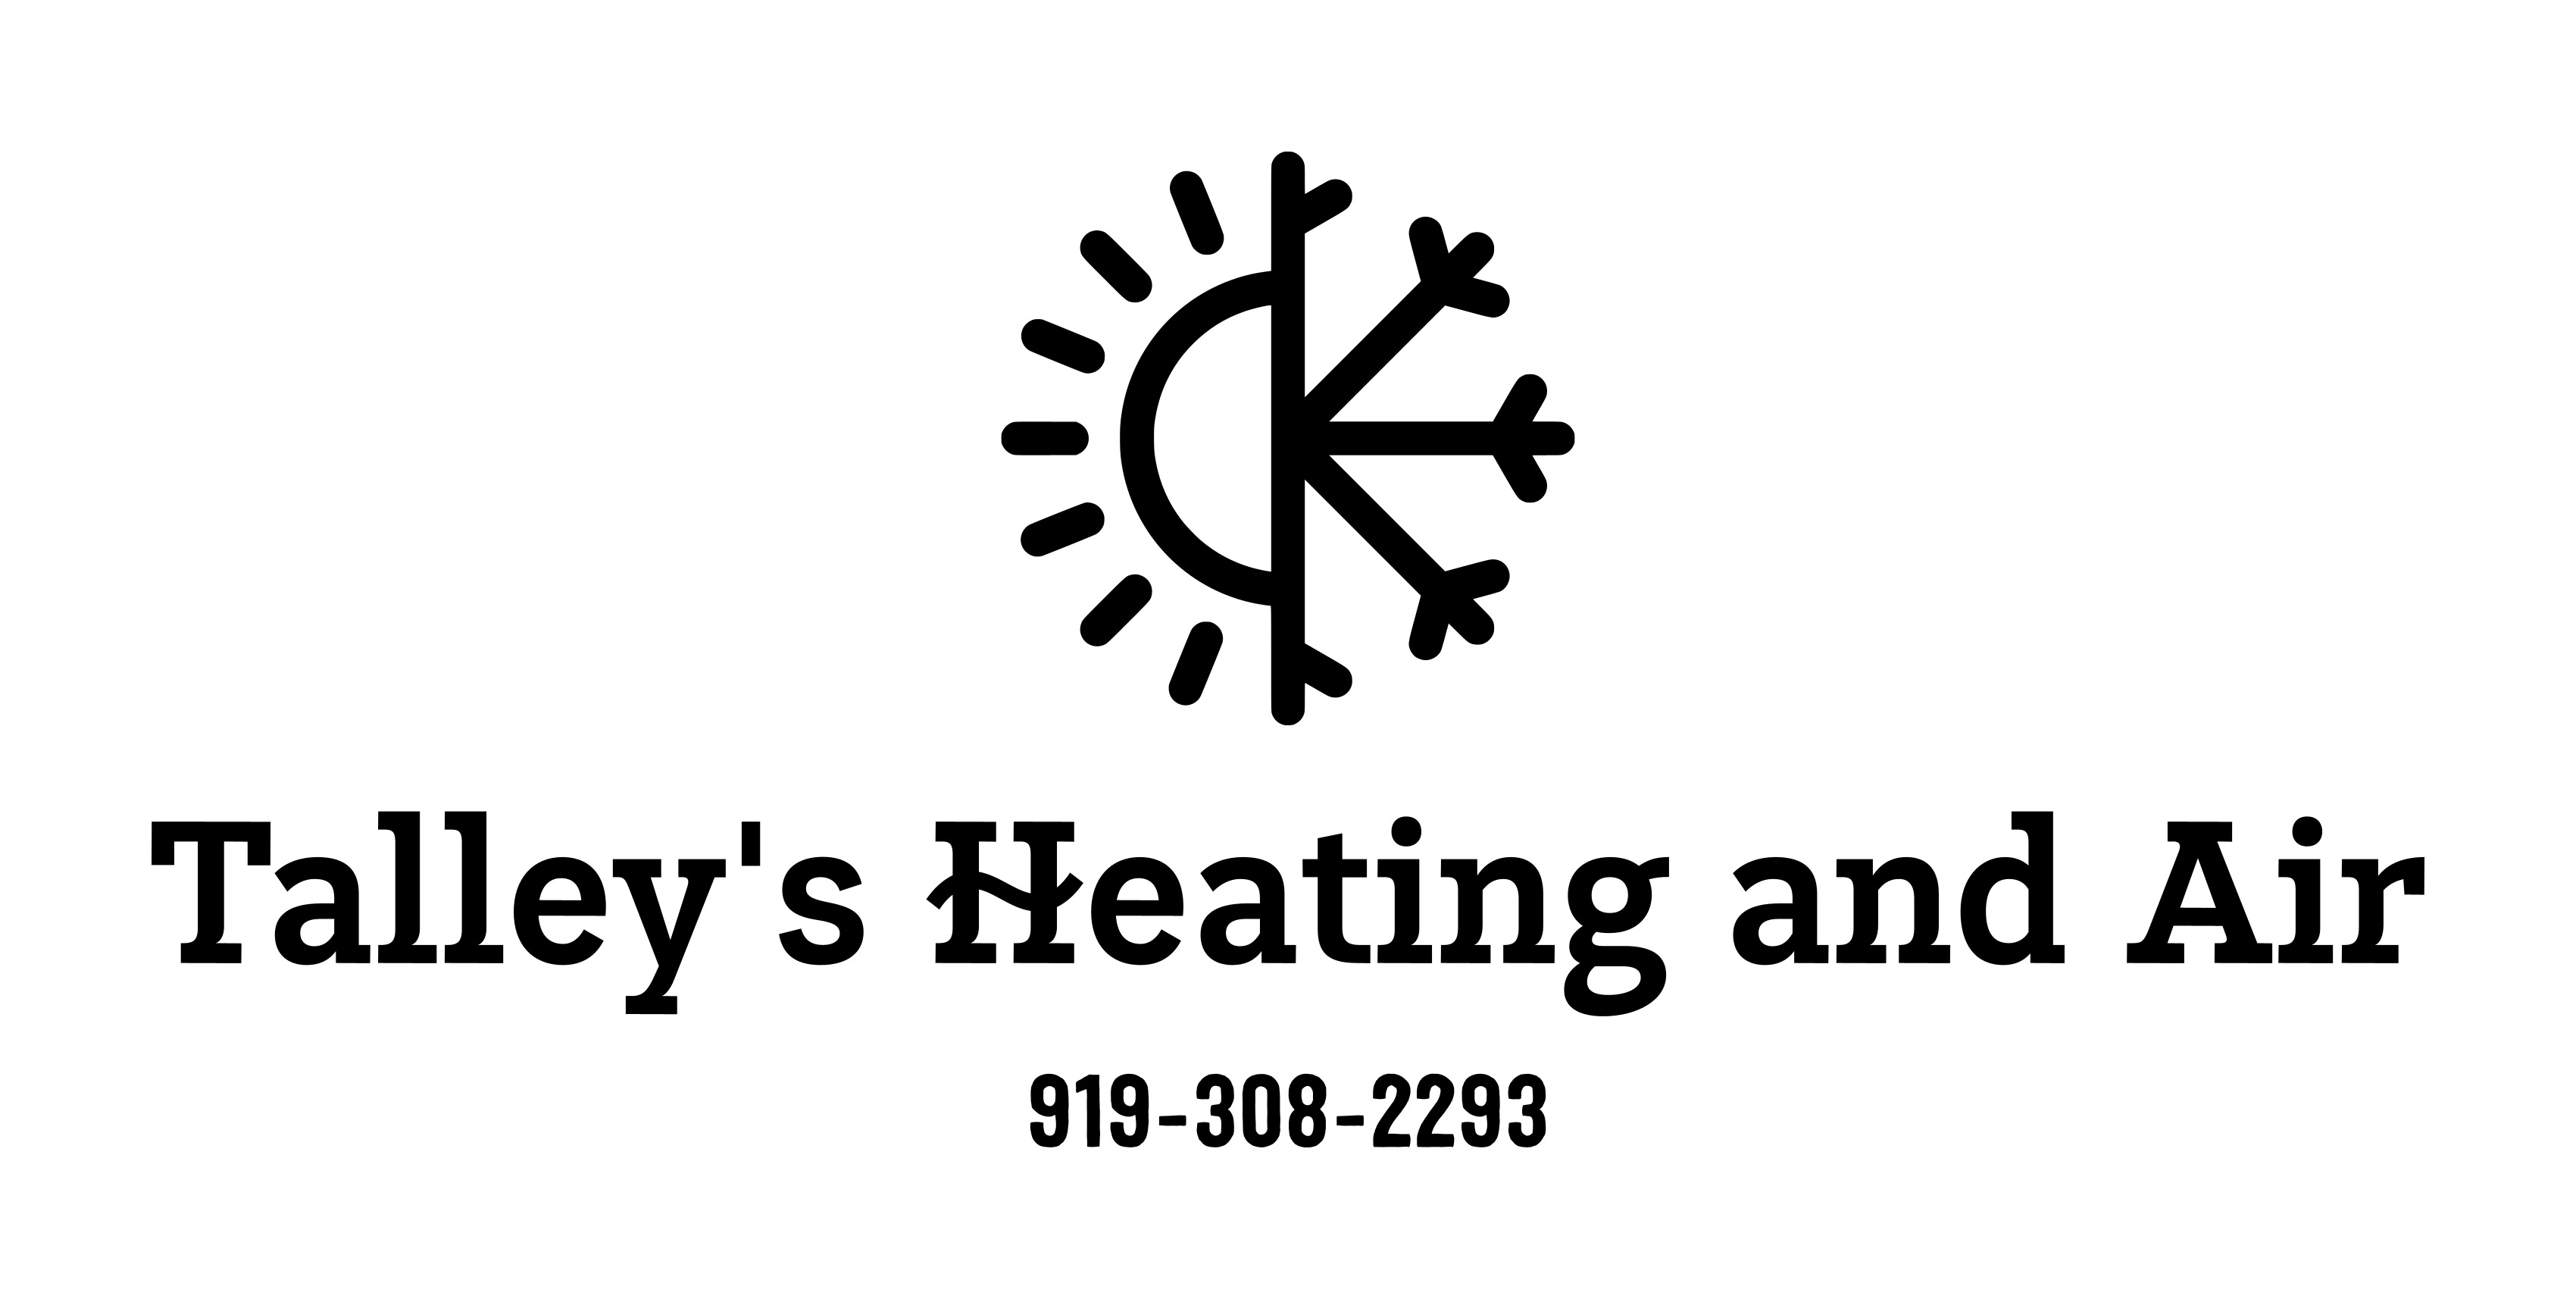 Talley's Heating and Air Logo